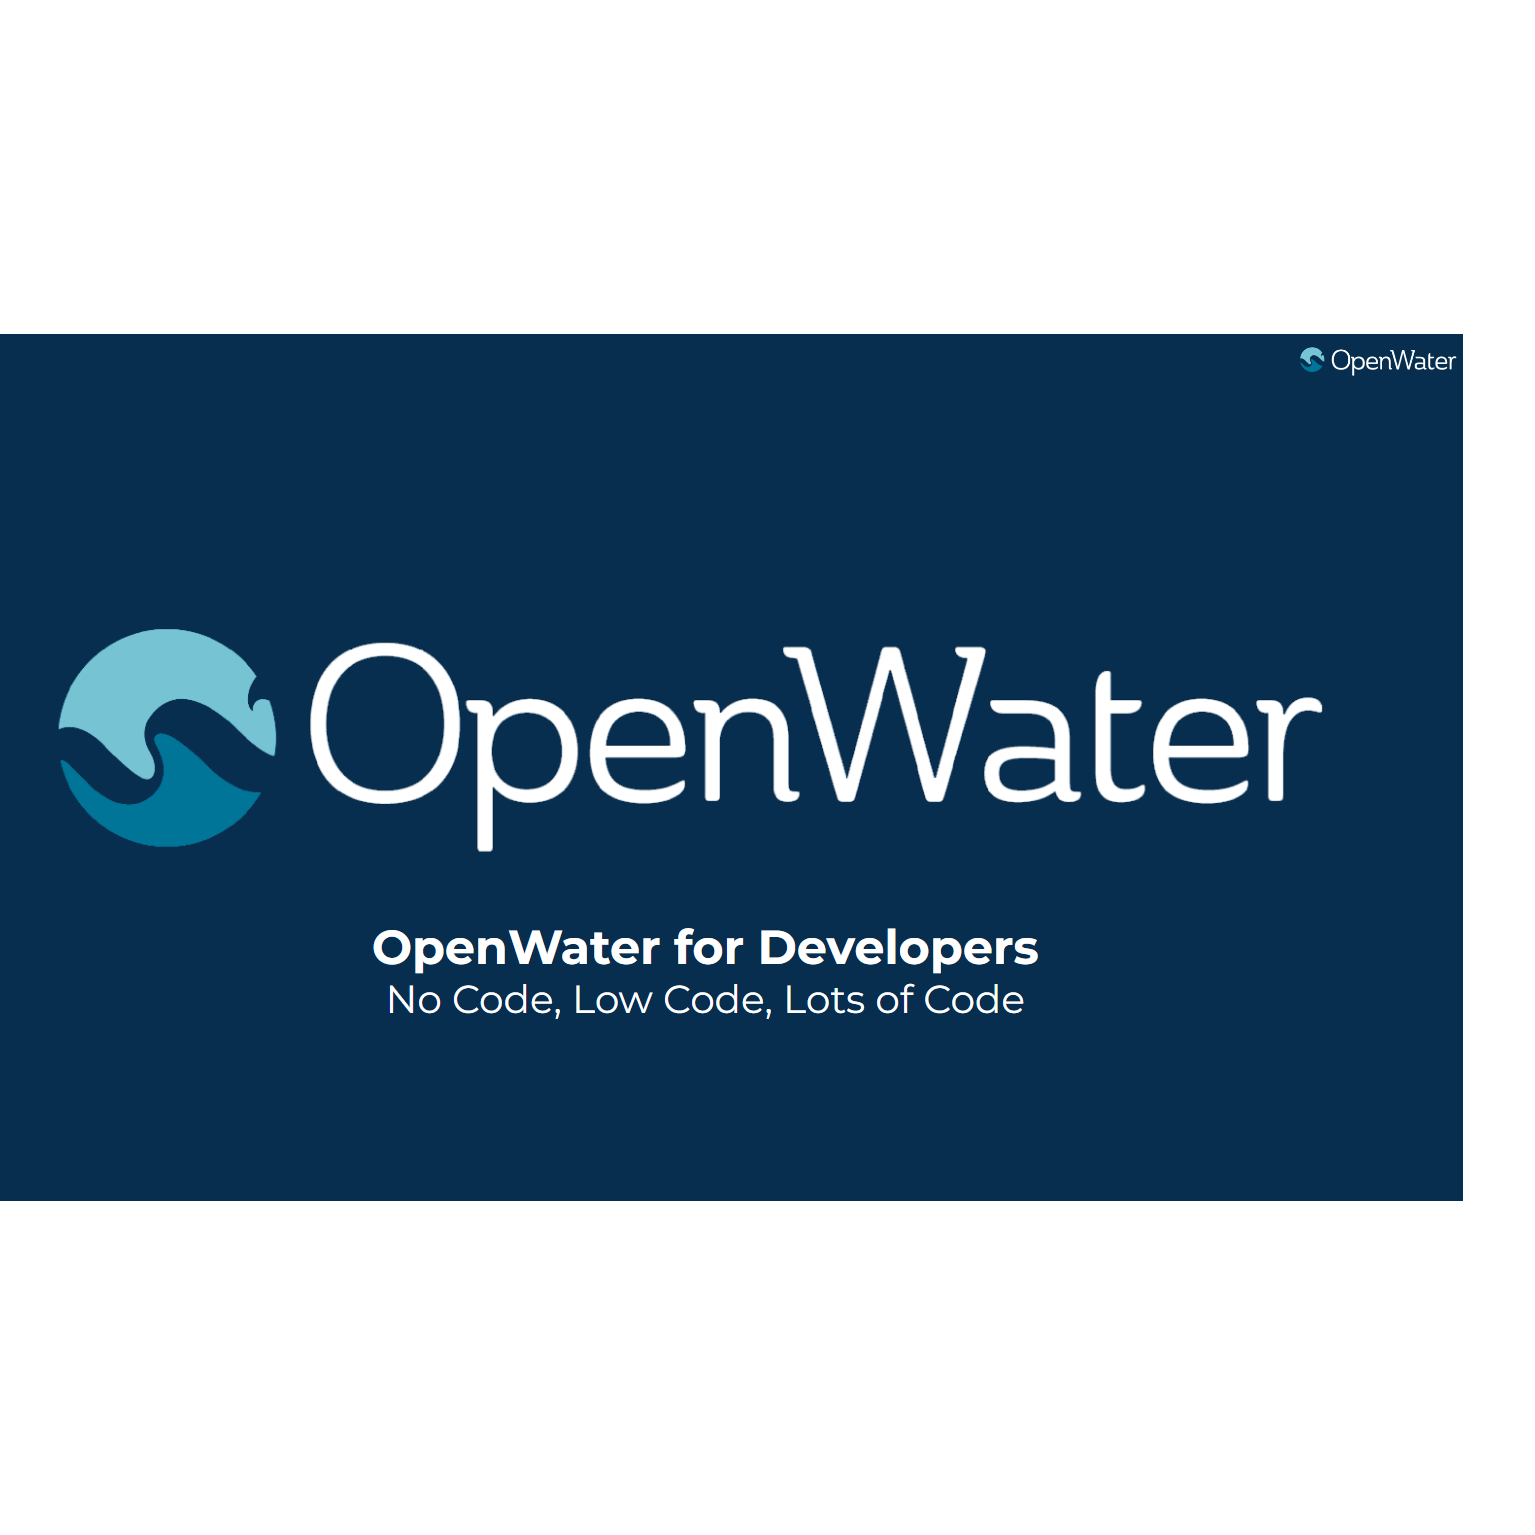 OpenWater for Developers